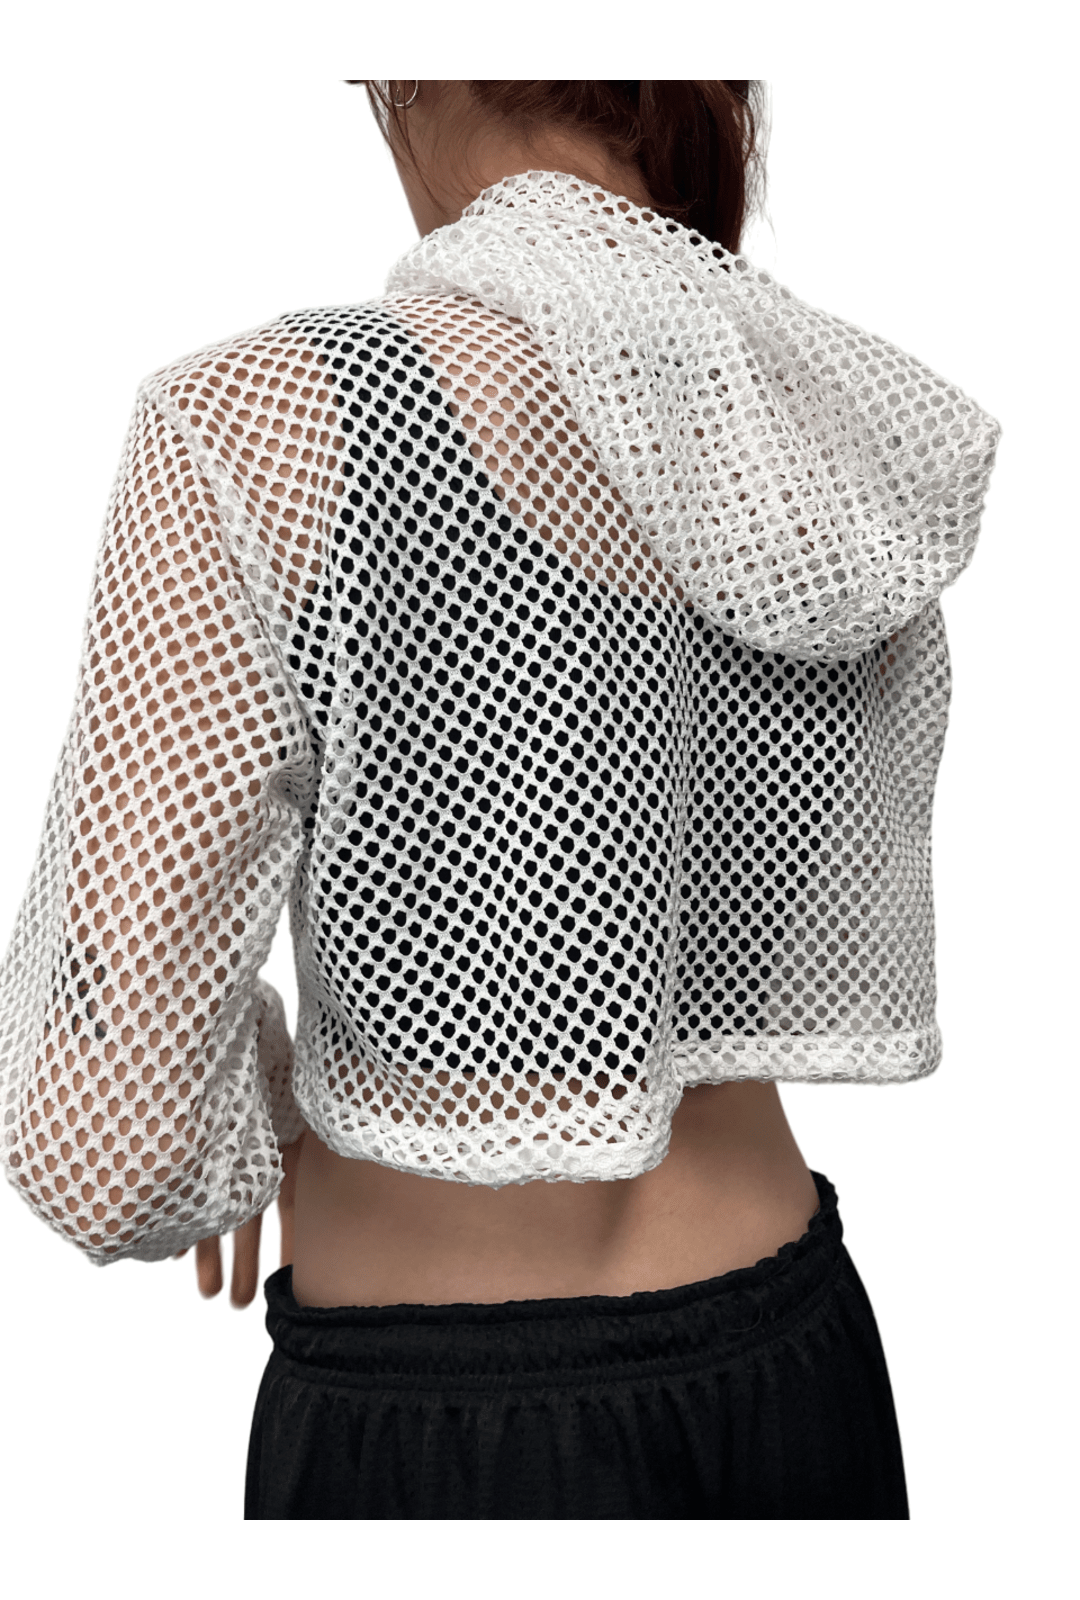 White Fishnet Cropped Hoodie